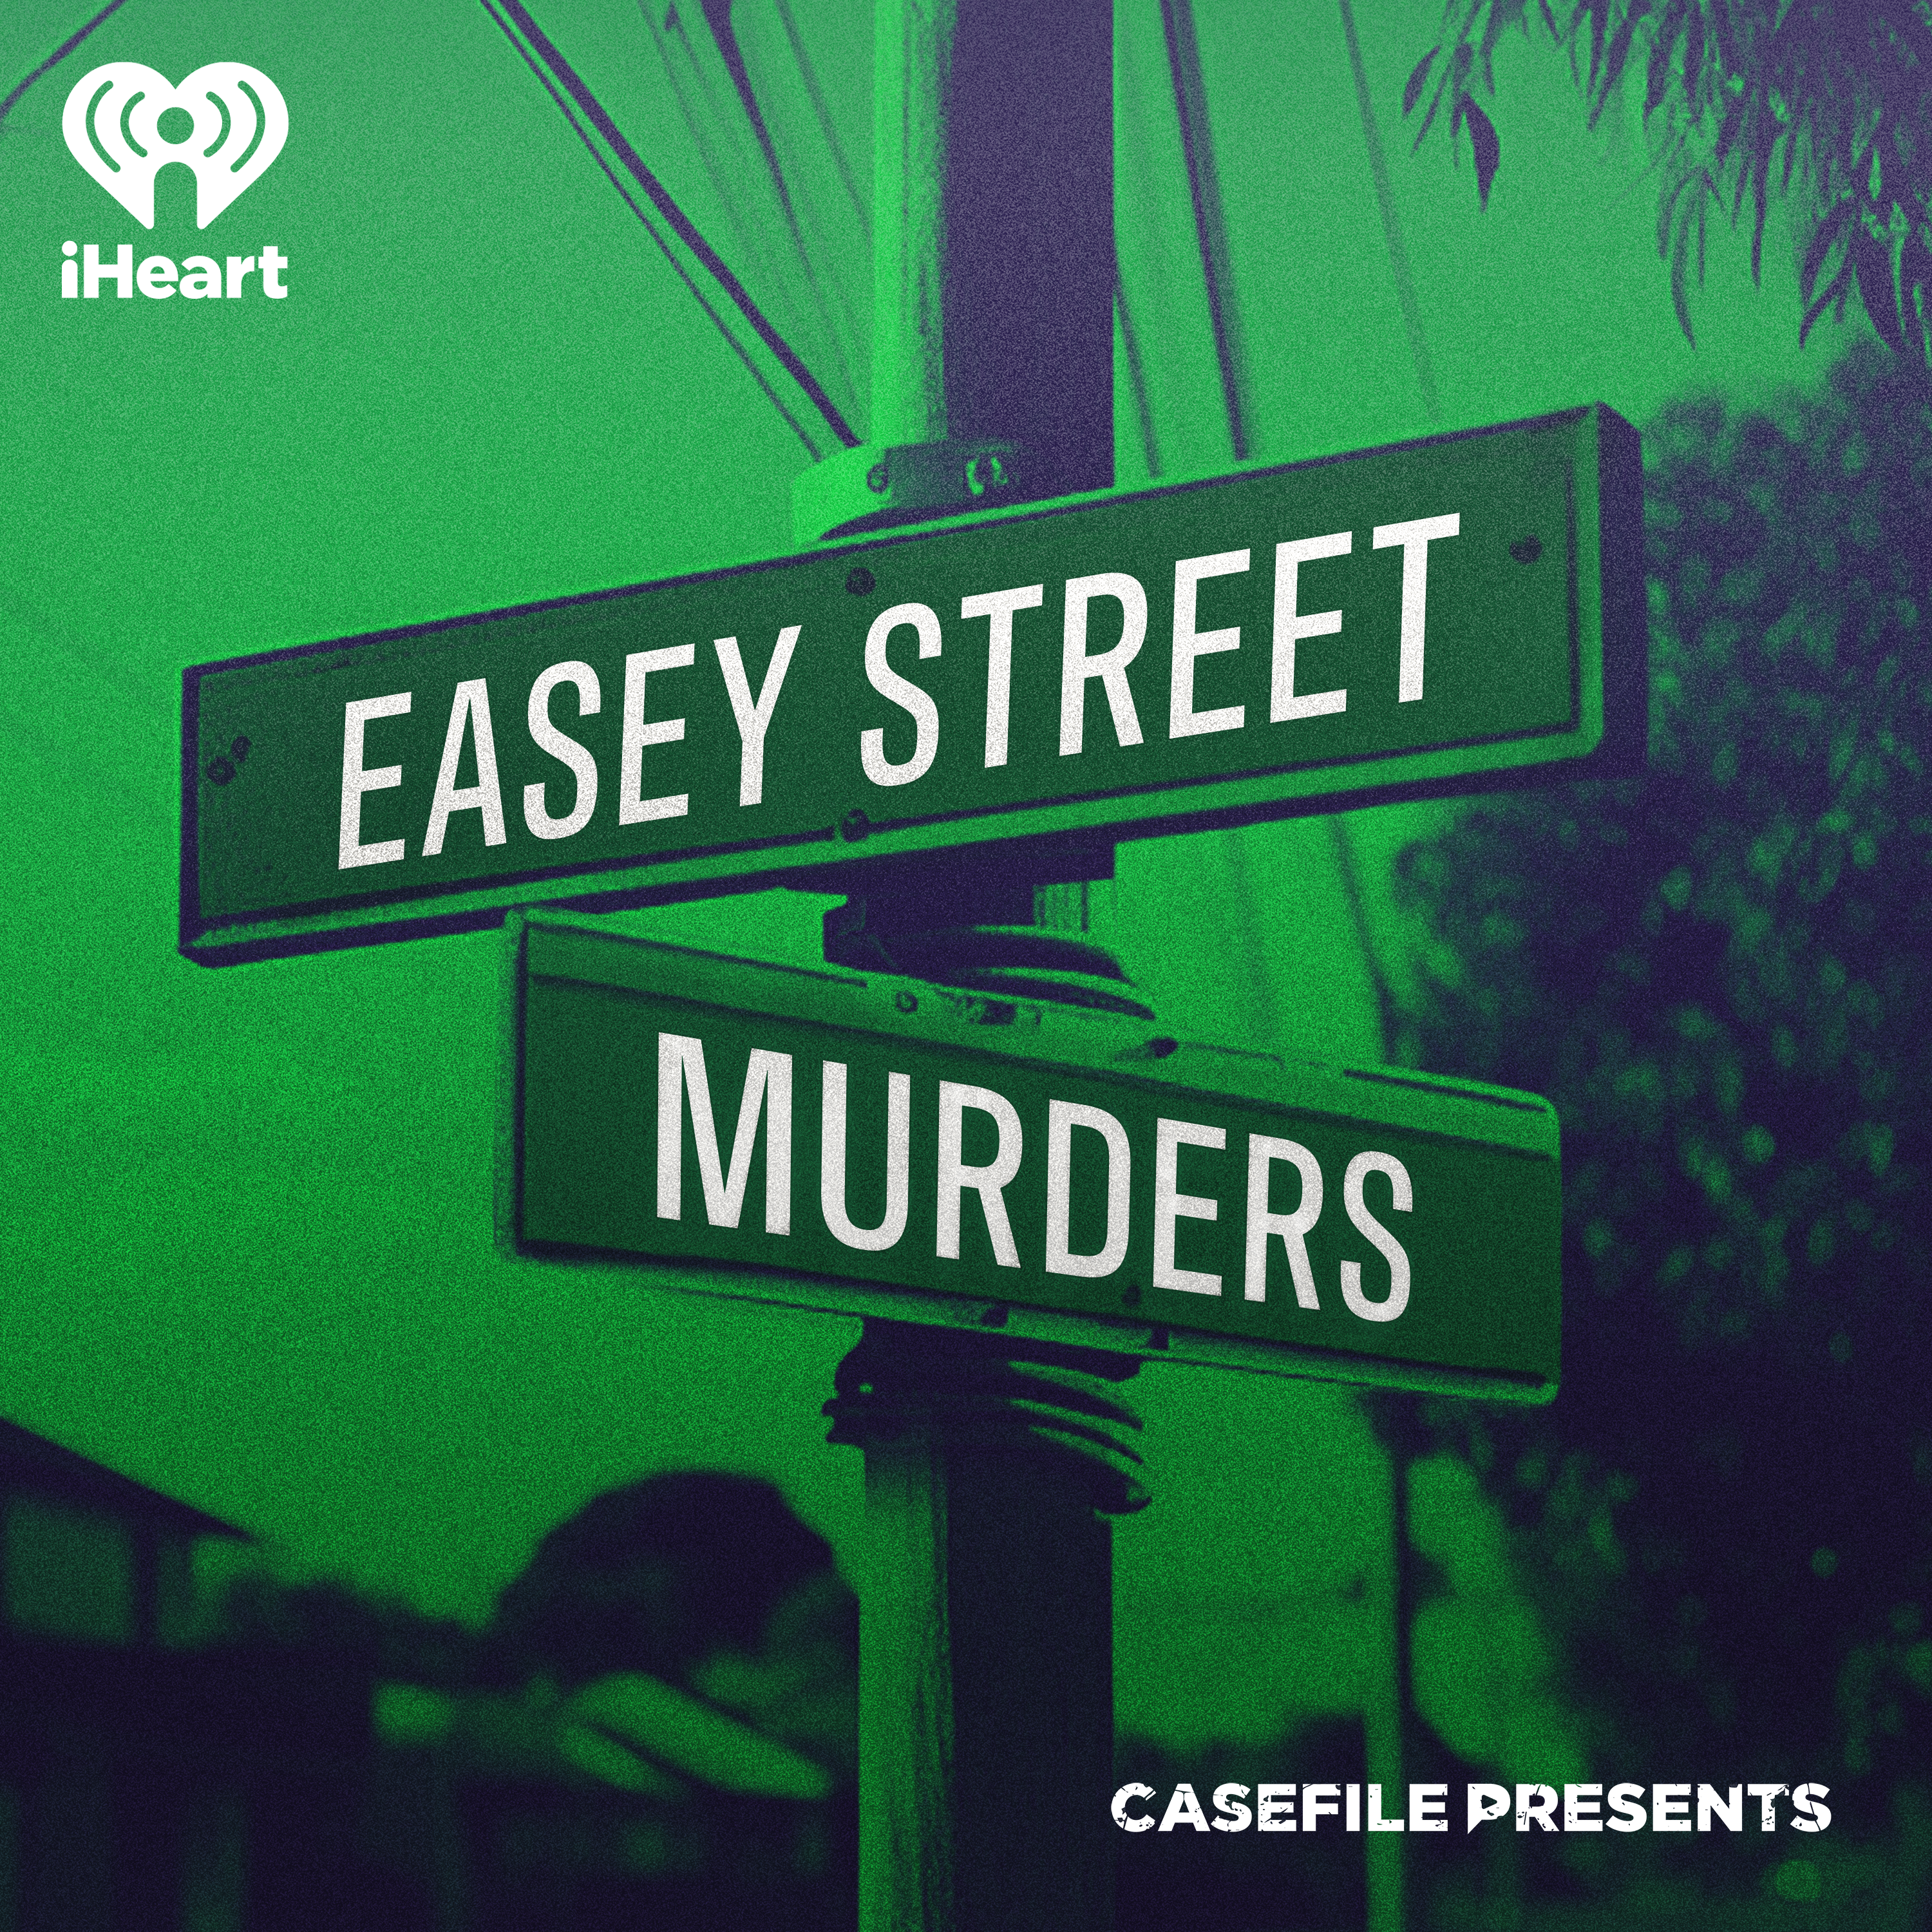 Casefile Presents: The Easey Street Murders podcast show image